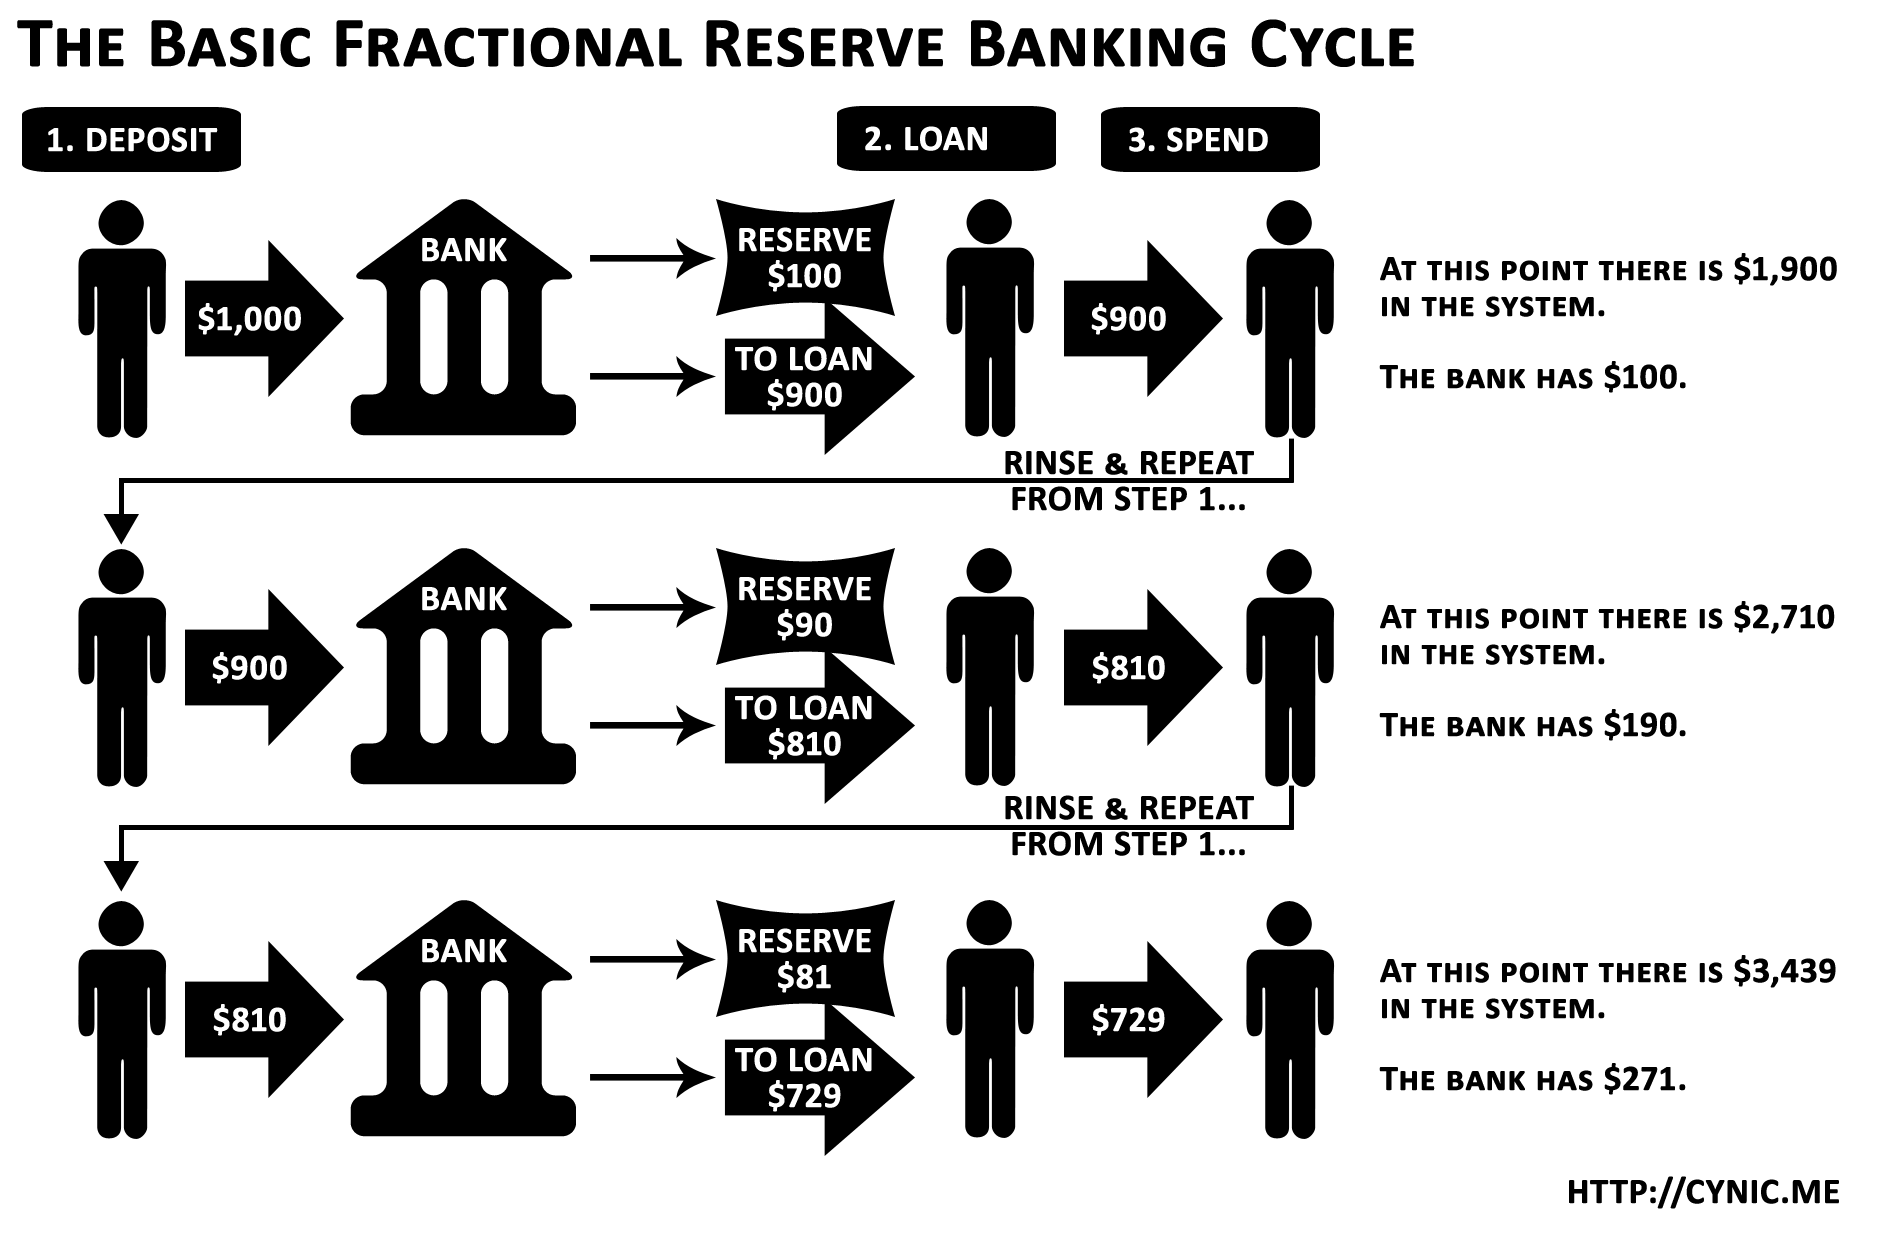 THE BASIC FRACTIONAL RESERVE BANKING CYCLE 1. DEPOSIT $1,000 $900 2.
  LOAN $100 TO LOAN $900 3. SPEND $900 RINSE & REPEAT FROM STEP 1...
  $810 TO LOAN $810 RINSE & REPEAT FROM STEP 1... AT THIS POINT THERE IS
  $1,900 IN THE SYSTEM. THE BANK HAS $100. AT THIS POINT THERE IS $2,710
  IN THE SYSTEM. THE BANK HAS $190. AT THIS POINT THERE IS $3,439 IN THE
  SYSTEM. THE BANK HAS $271. HTTP://CYNIC.ME 